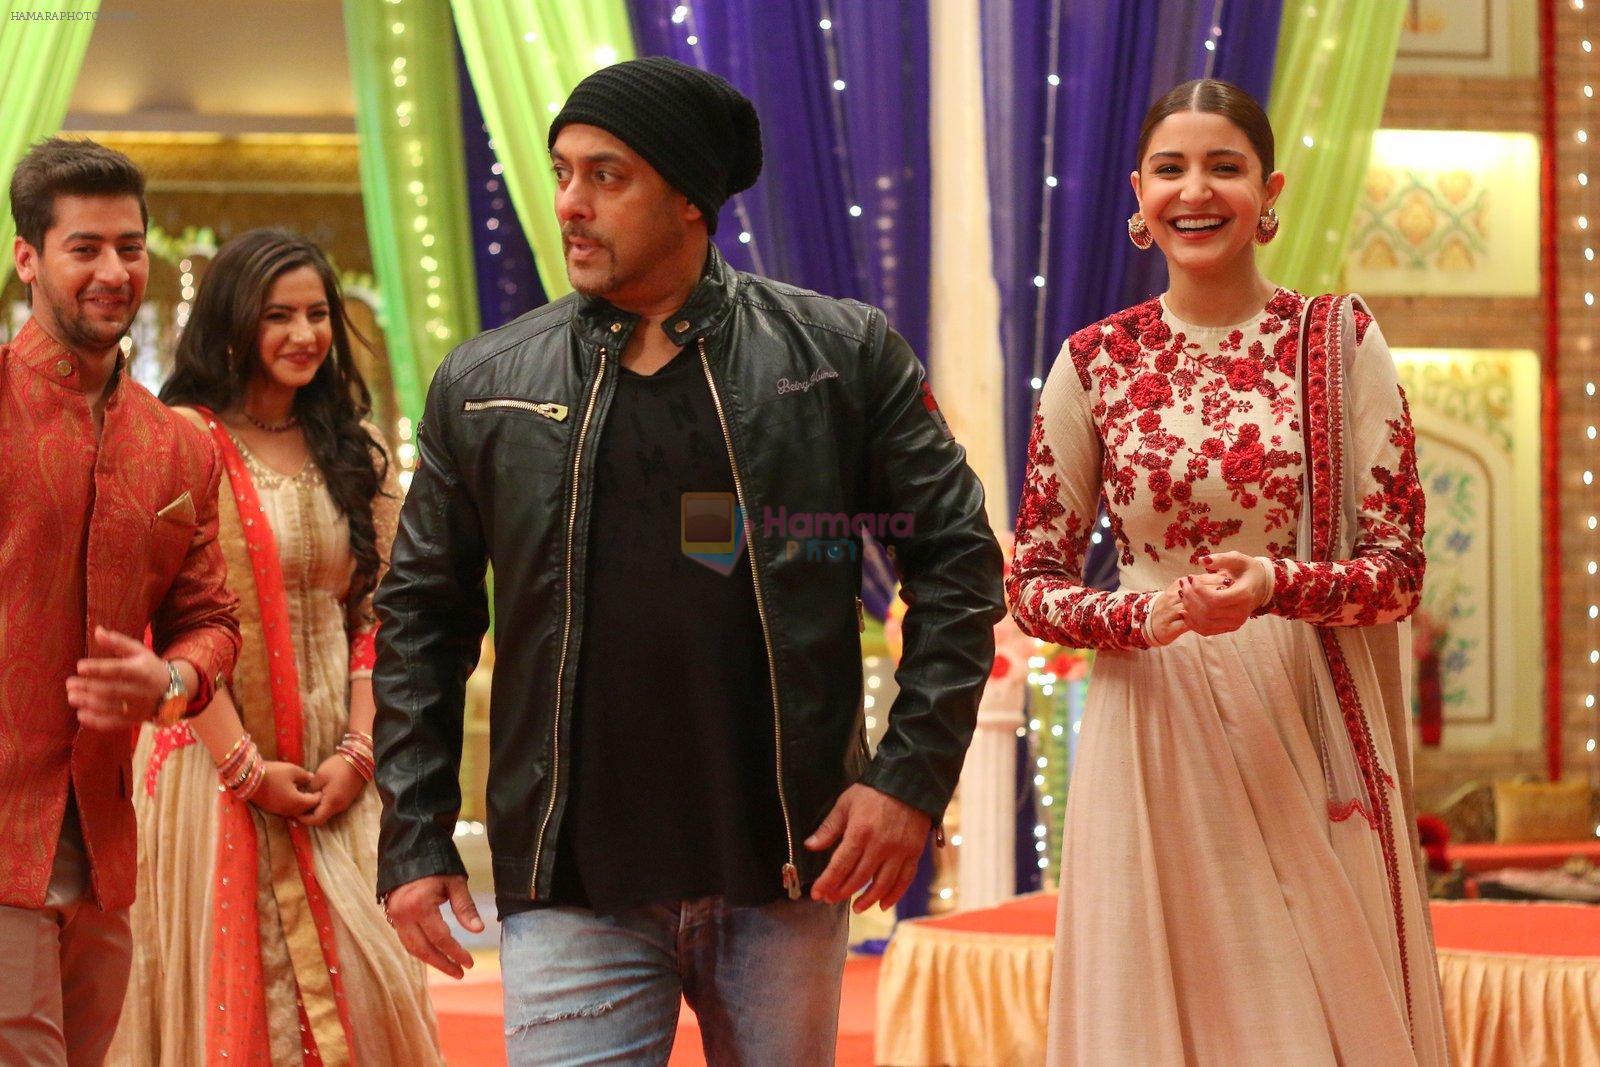 Salman Khan, Anushka Sharma, Meera Deosthale, Paras Arora promote Sultan on the sets of COLORS show Udaan on 21st June 2016